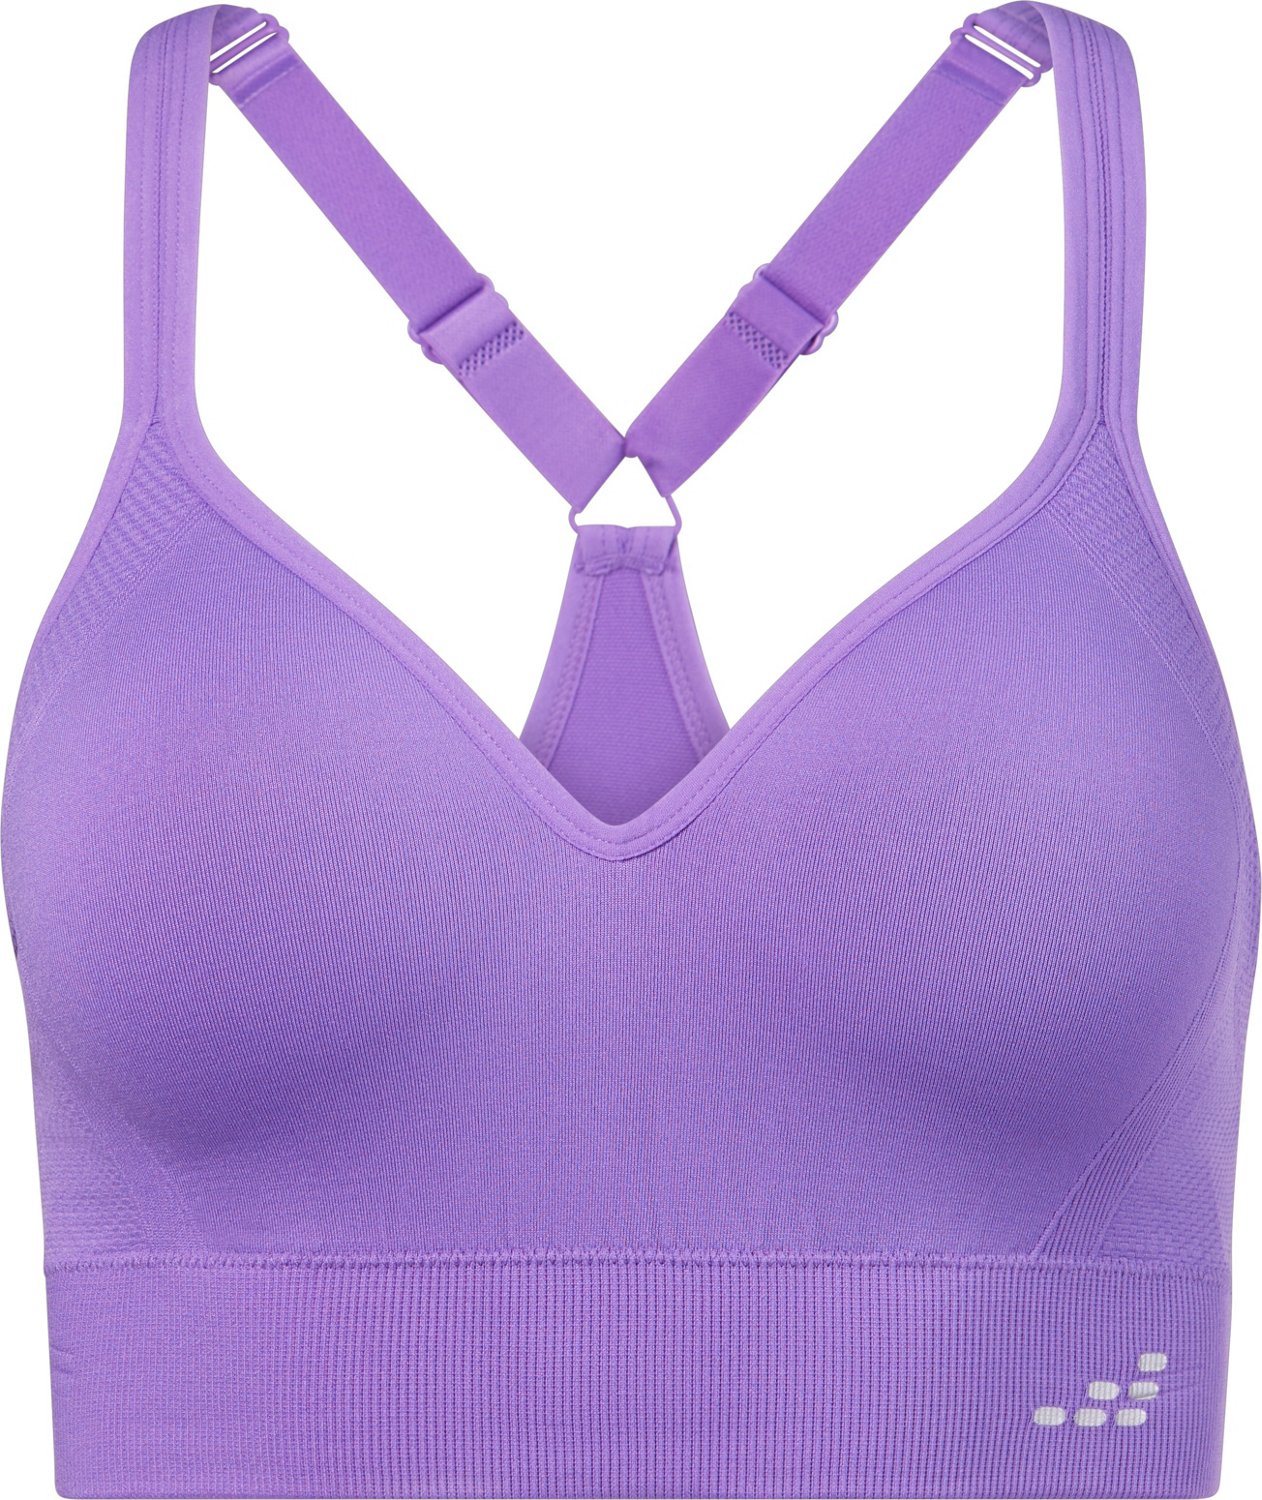 BCG Women's Low Support Molded Cup Sports Bra                                                                                    - view number 1 selected